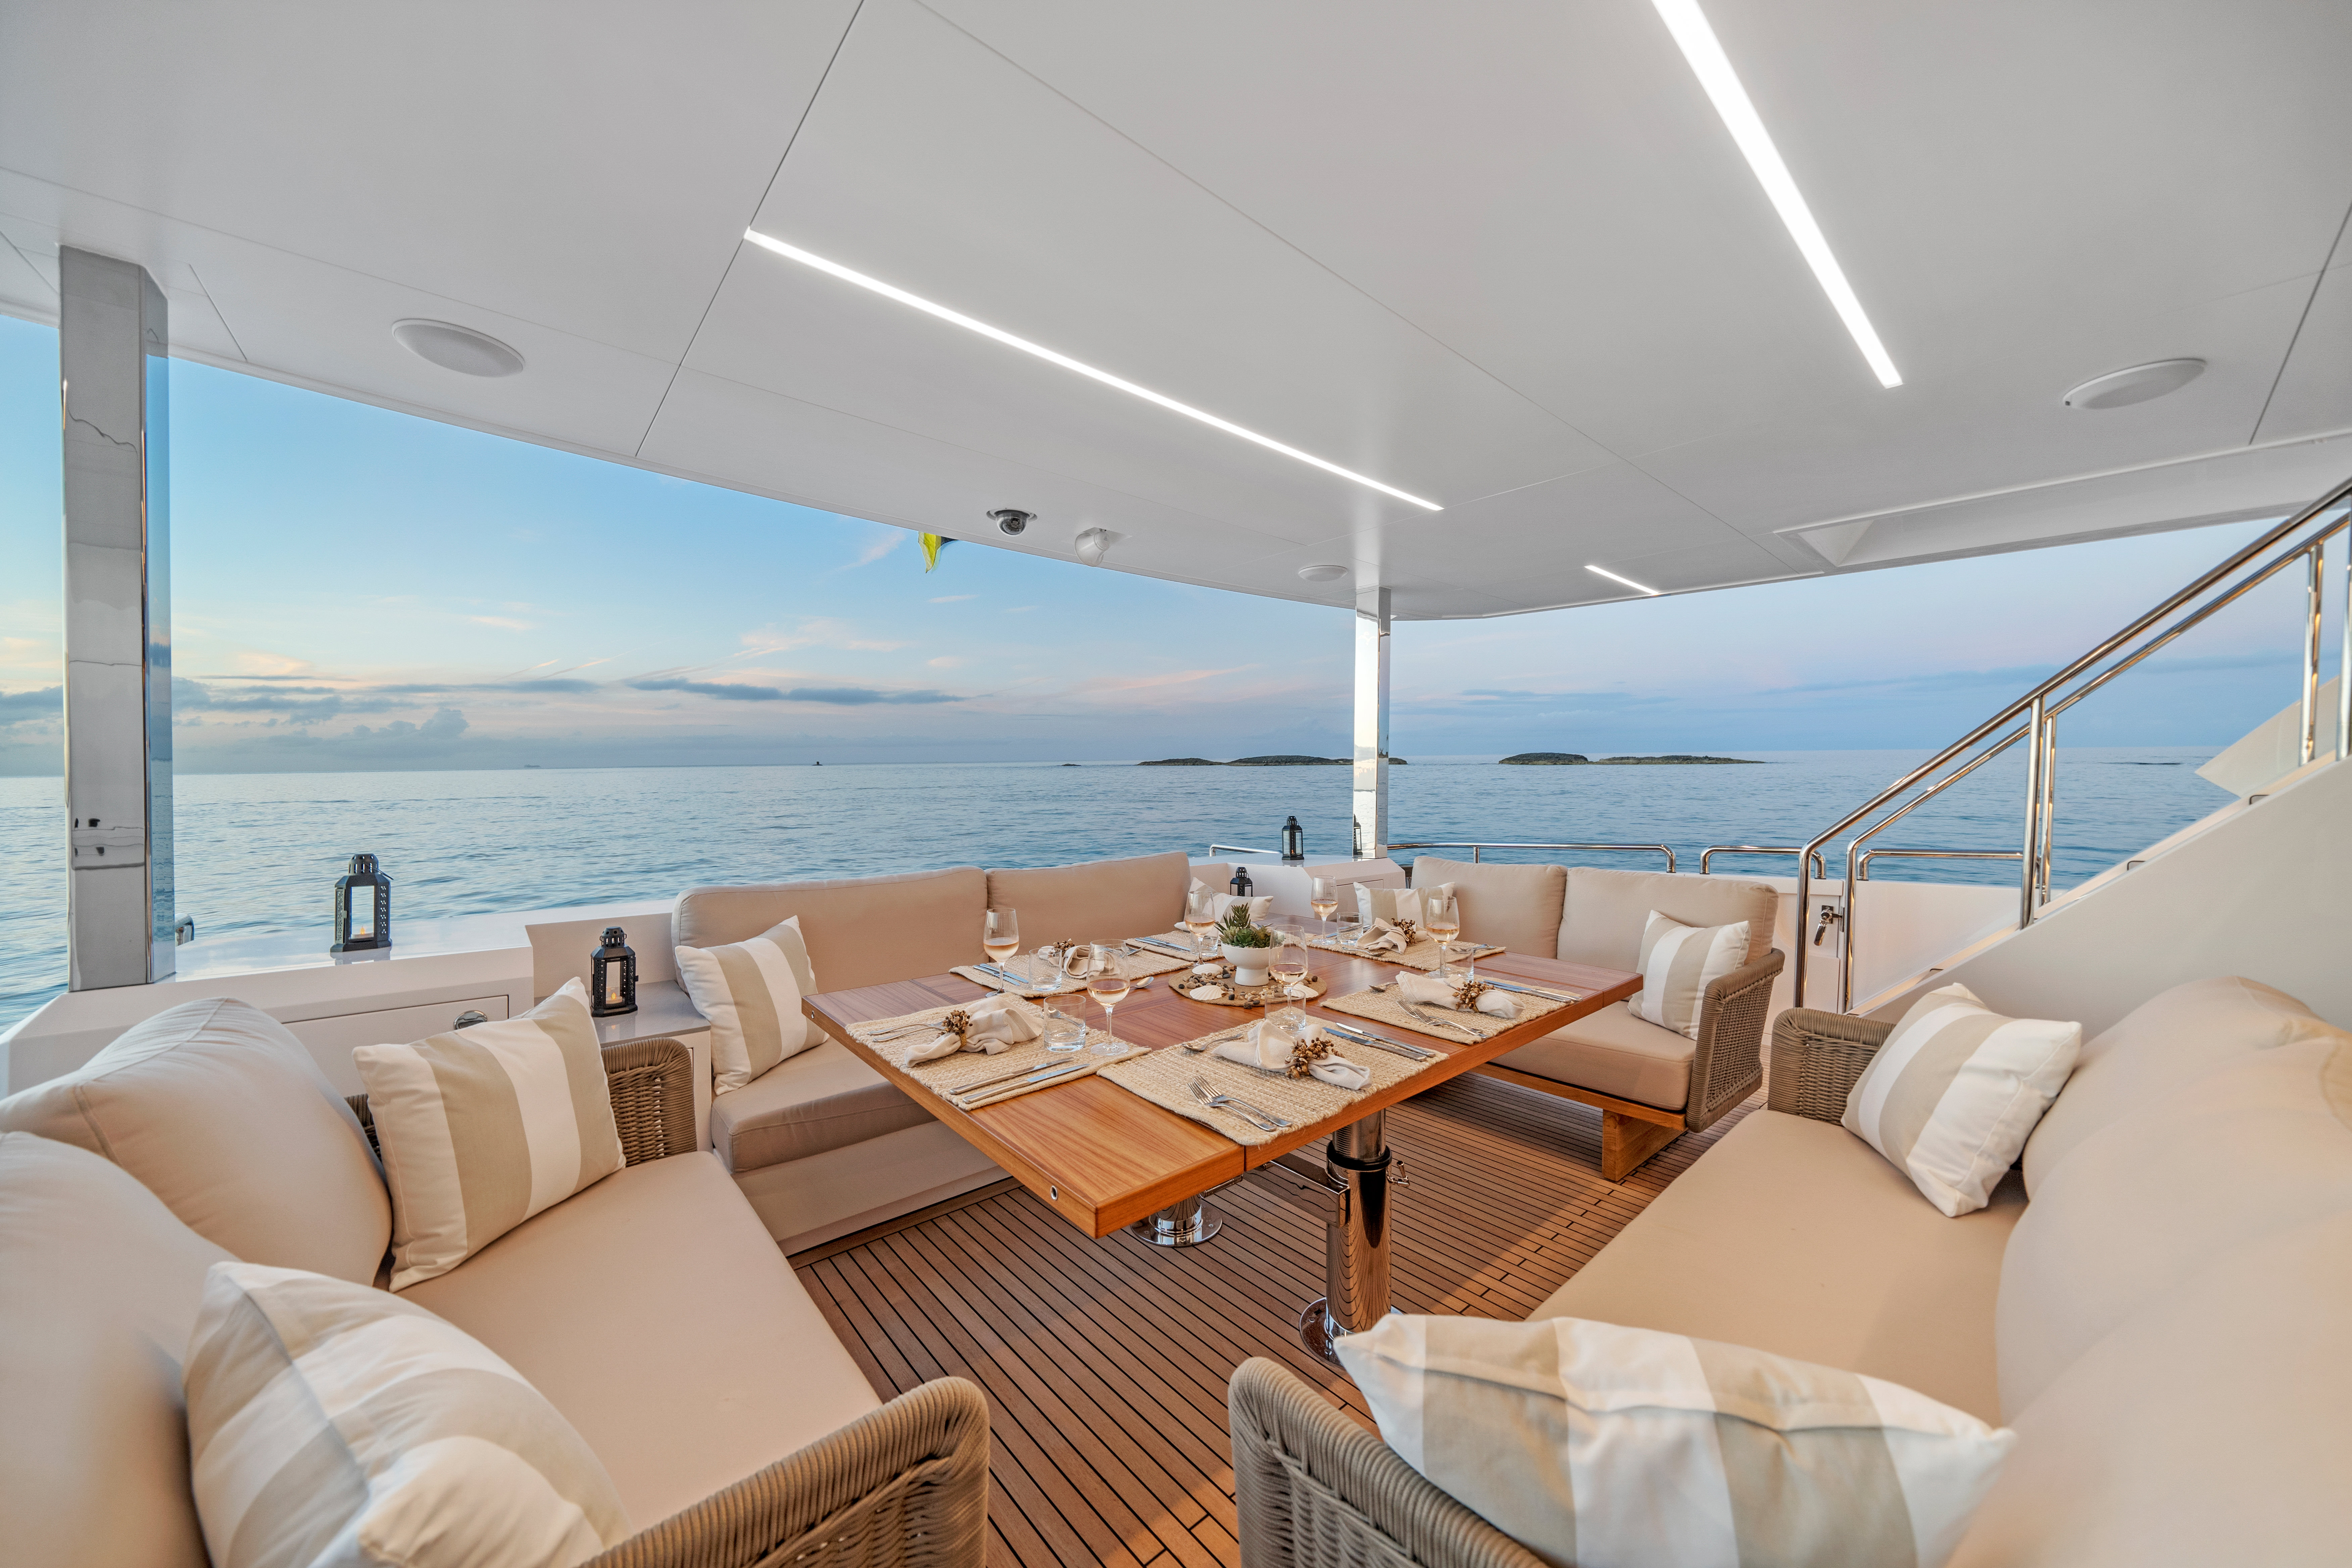 Aft Deck Dining Area For Guests